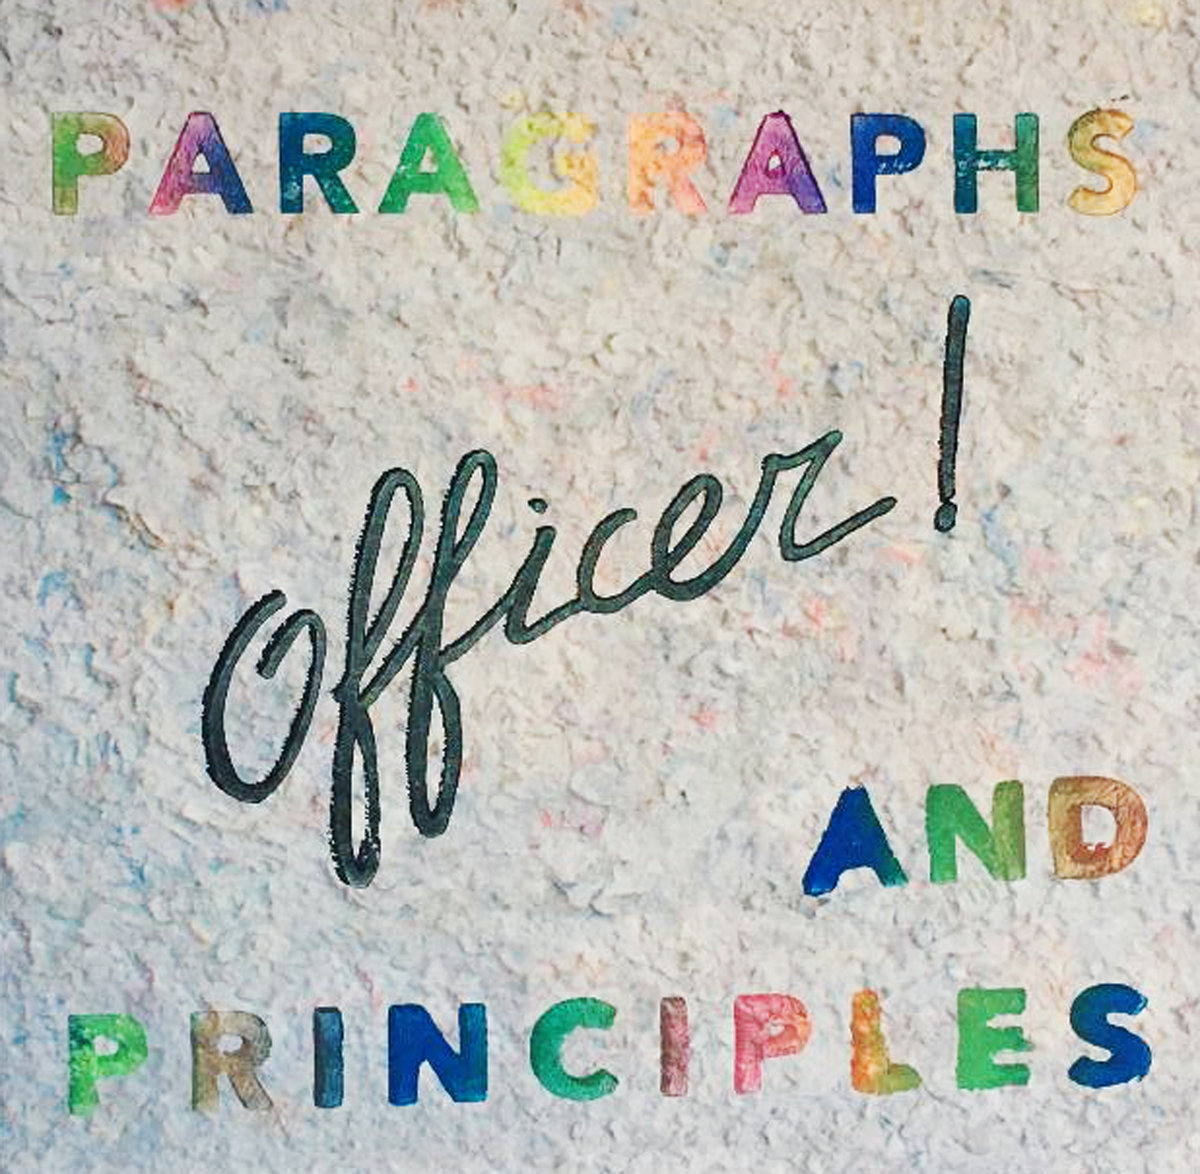 PARAGRAPHS AND PRINCIPLES